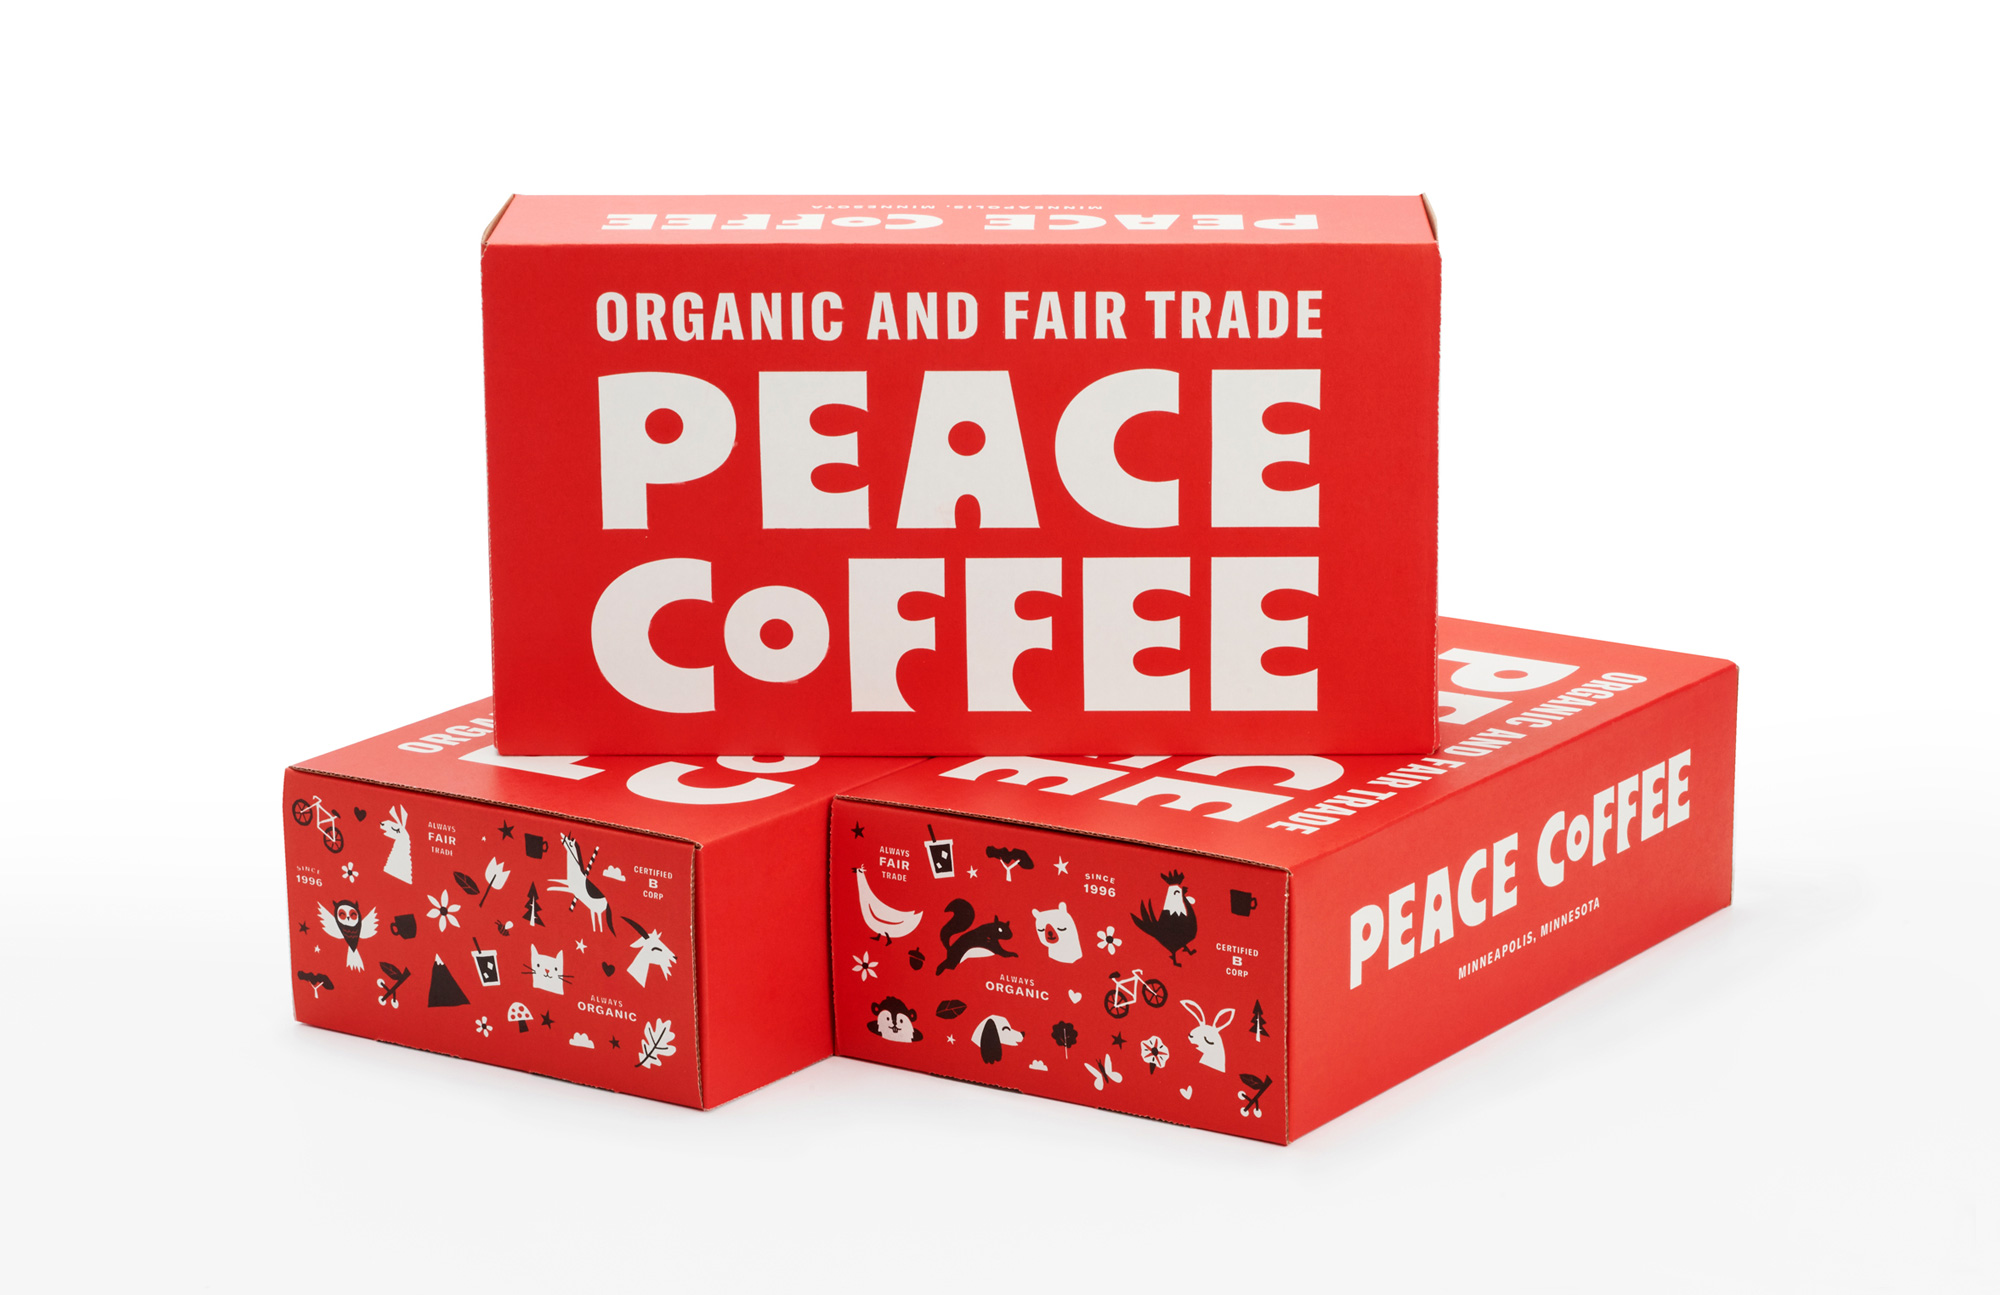 New Logo, Identity, and Packaging for Peace Coffee by Werner Design Werks